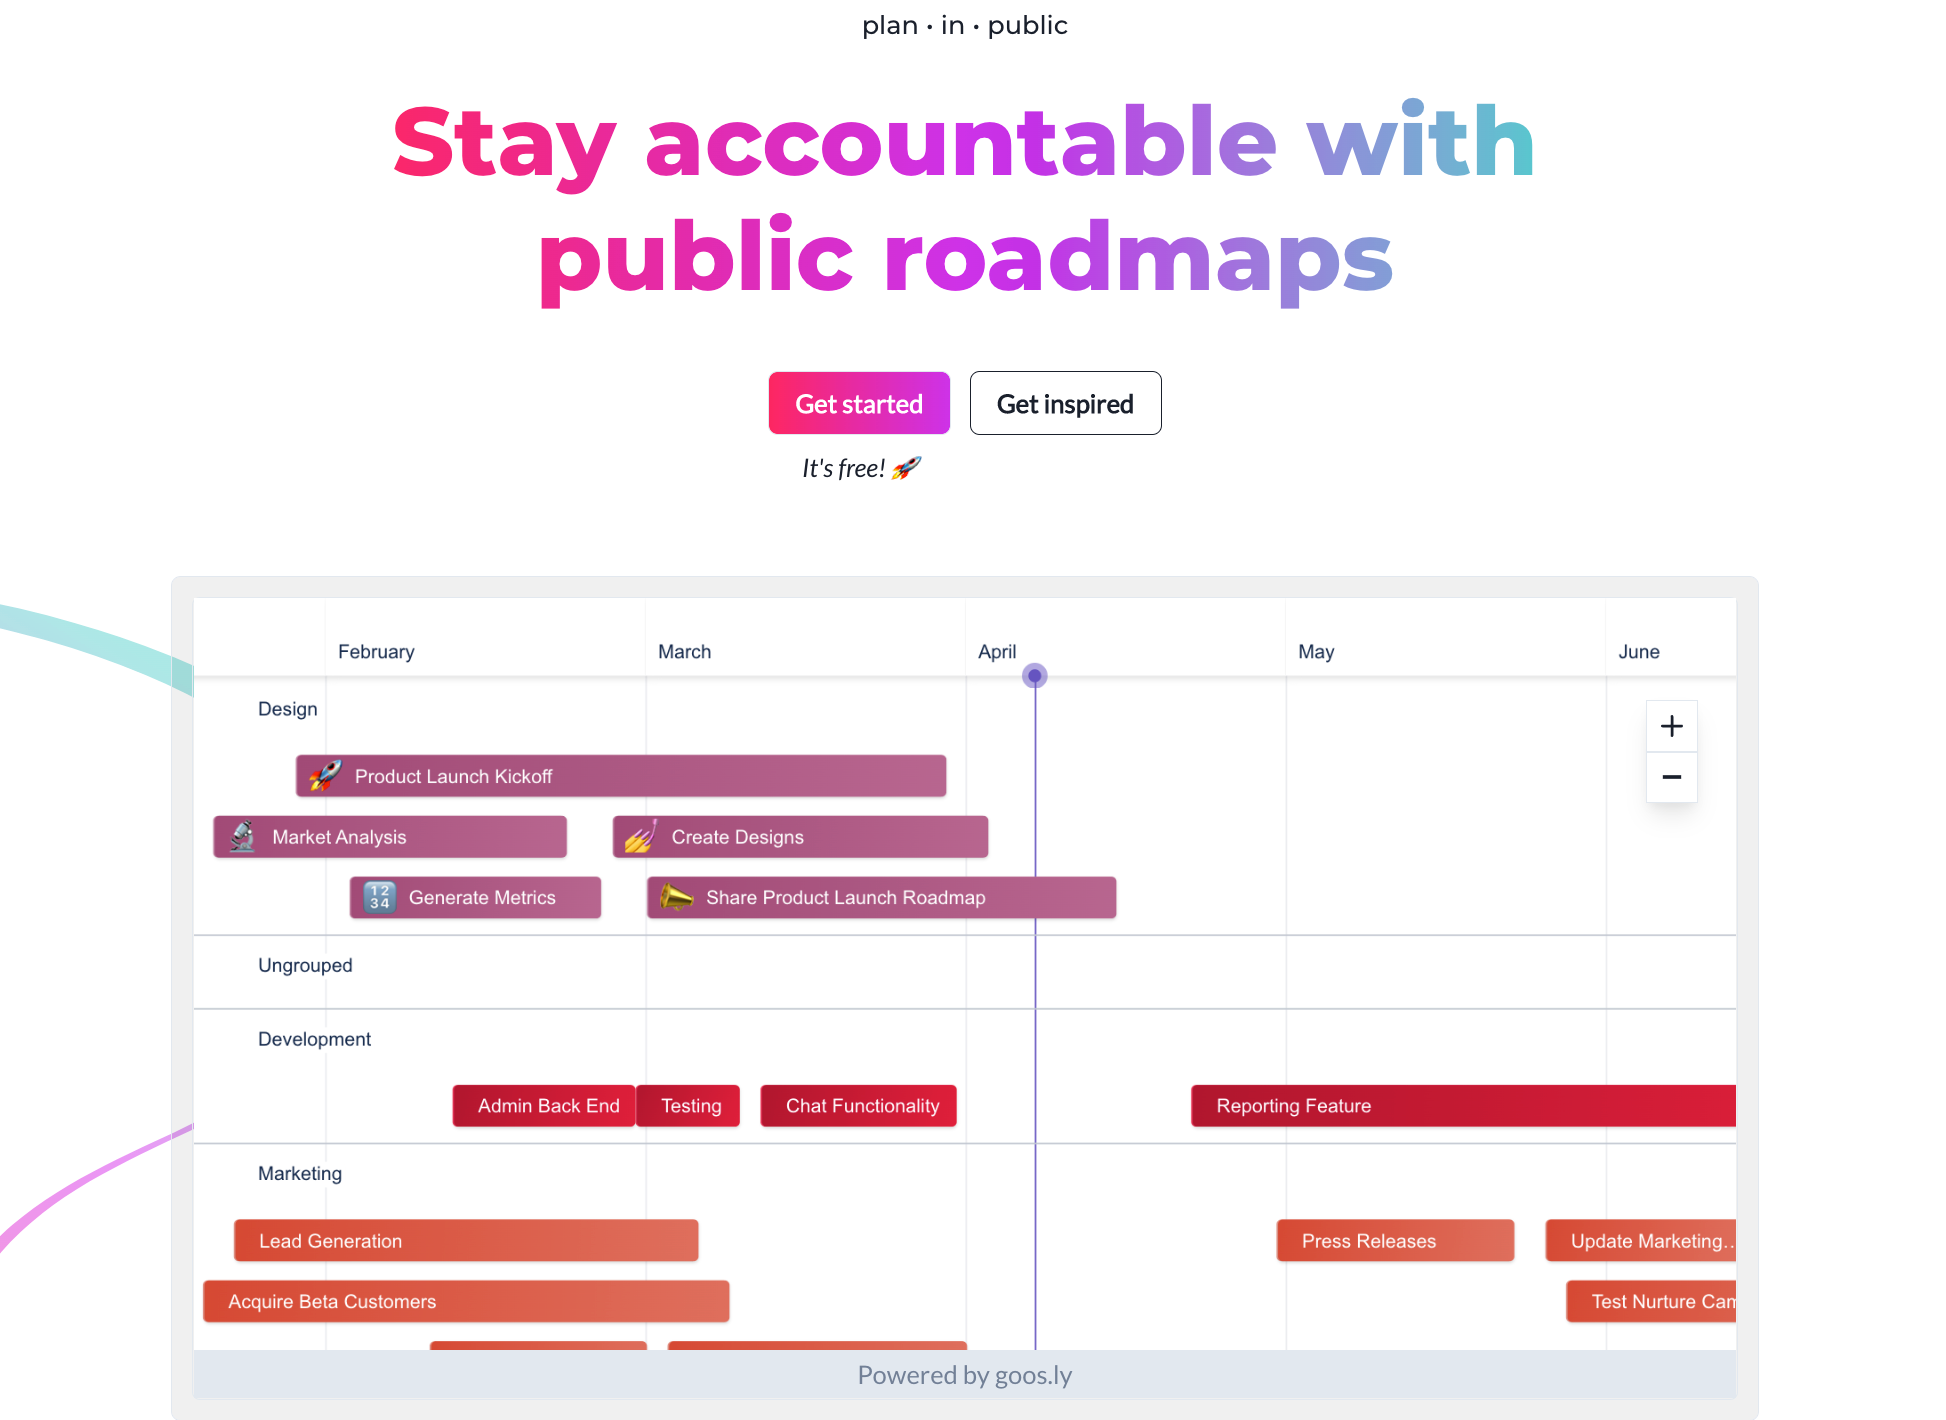 Goosly: the art of planning in public